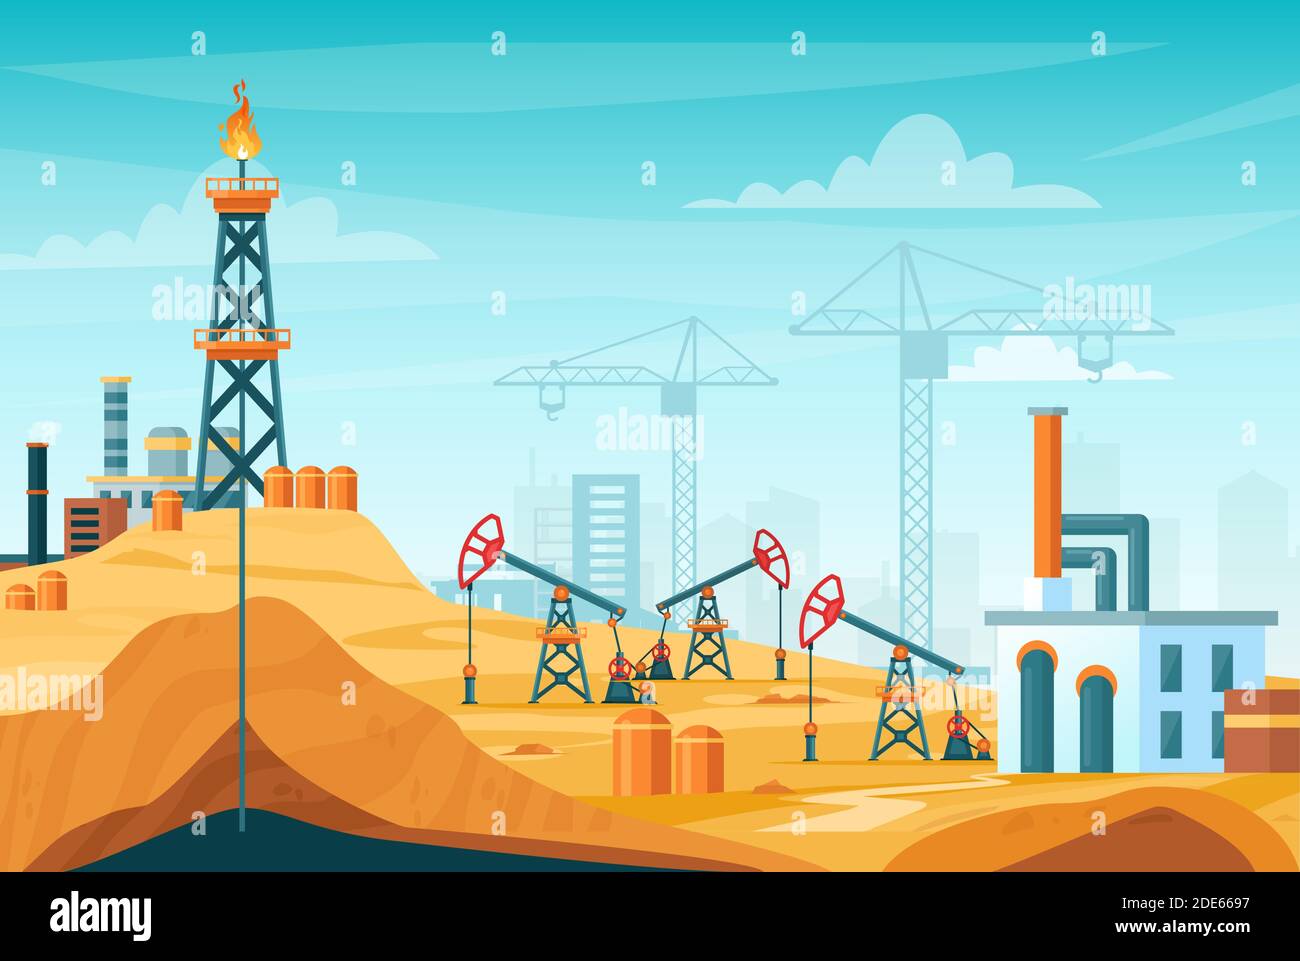 Oil extraction landscape vector illustration, cartoon flat urban factory skyline with well drilling, oil rig tower to pump black liquid Stock Vector